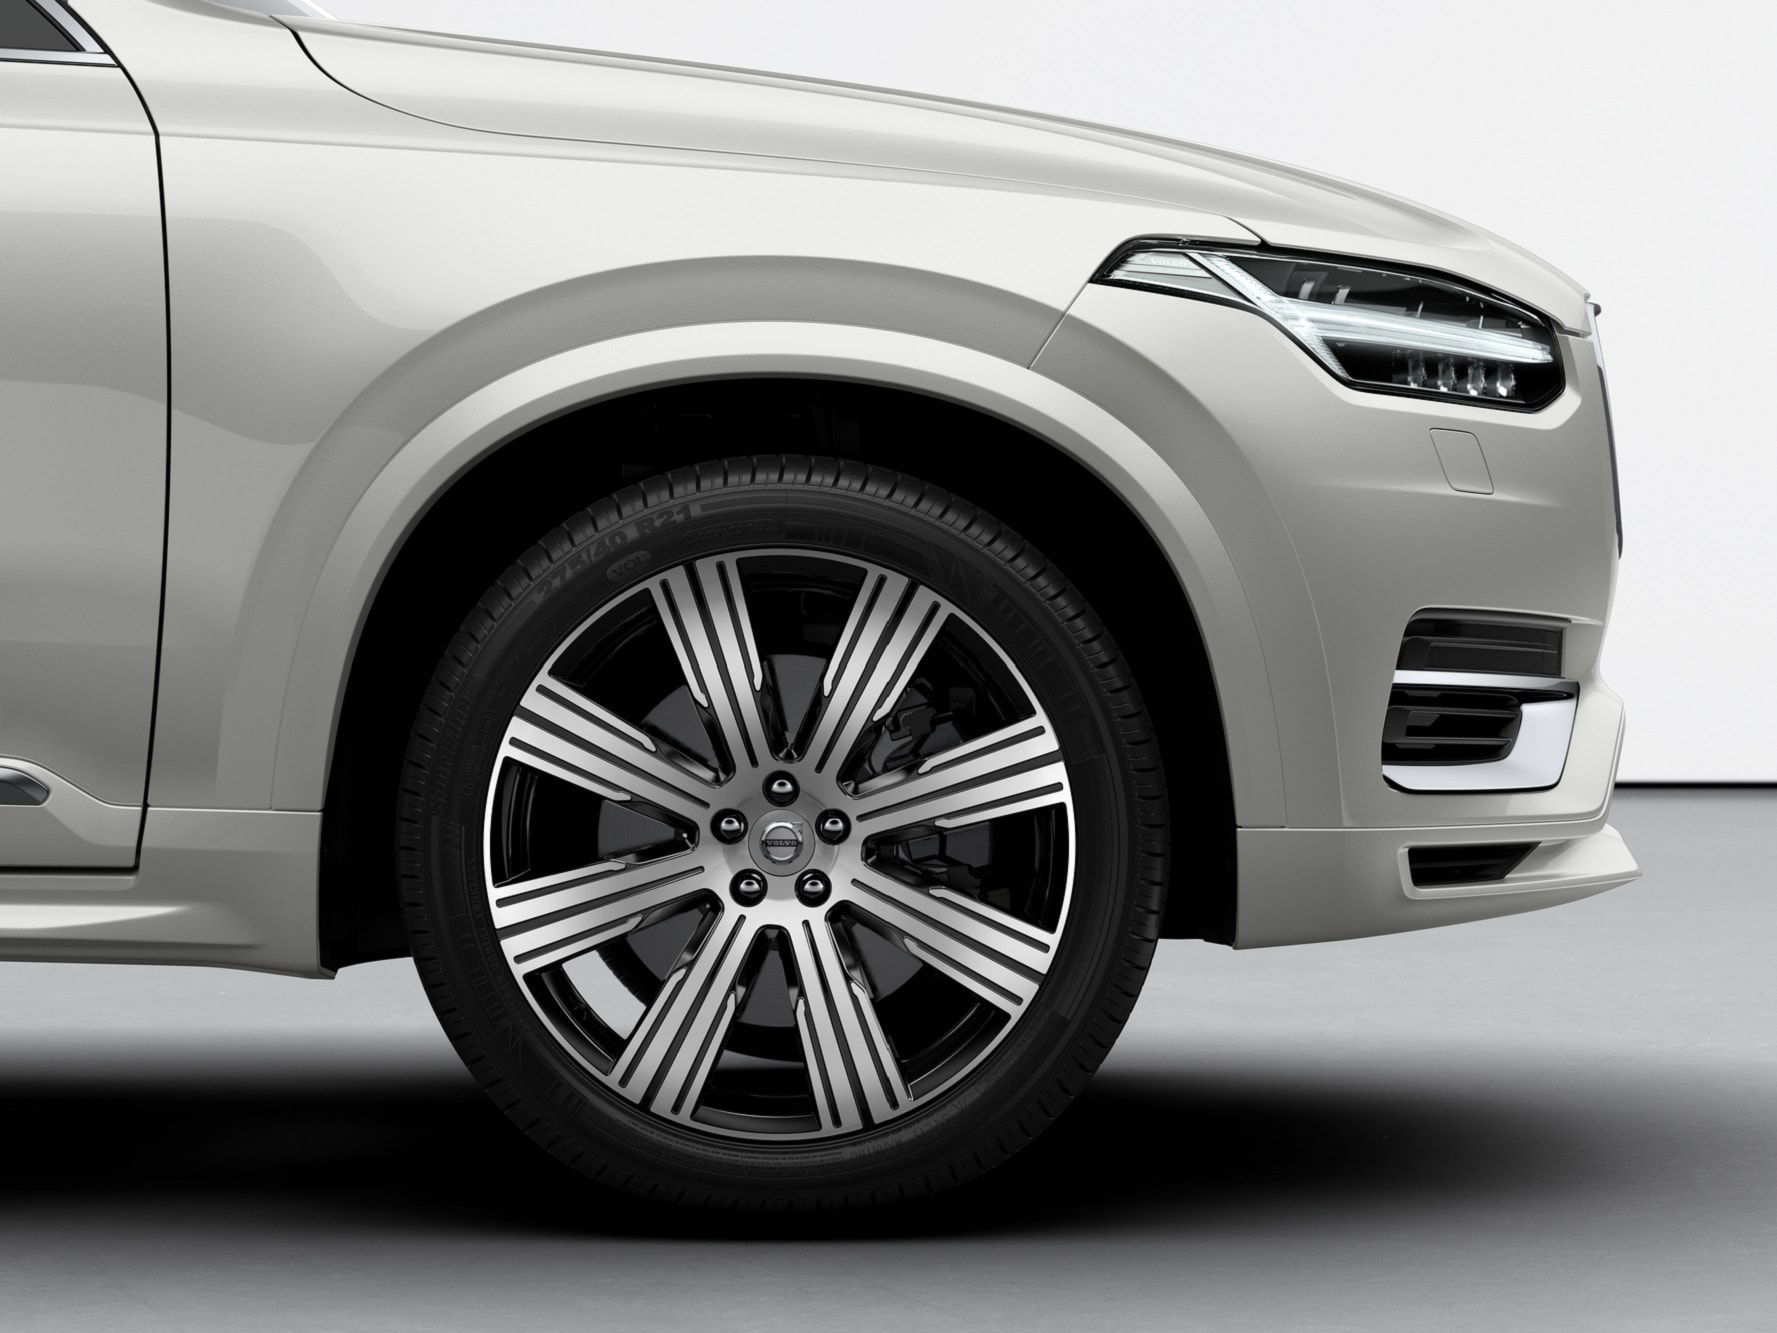 A Volvo XC90 model's wheel from left side view